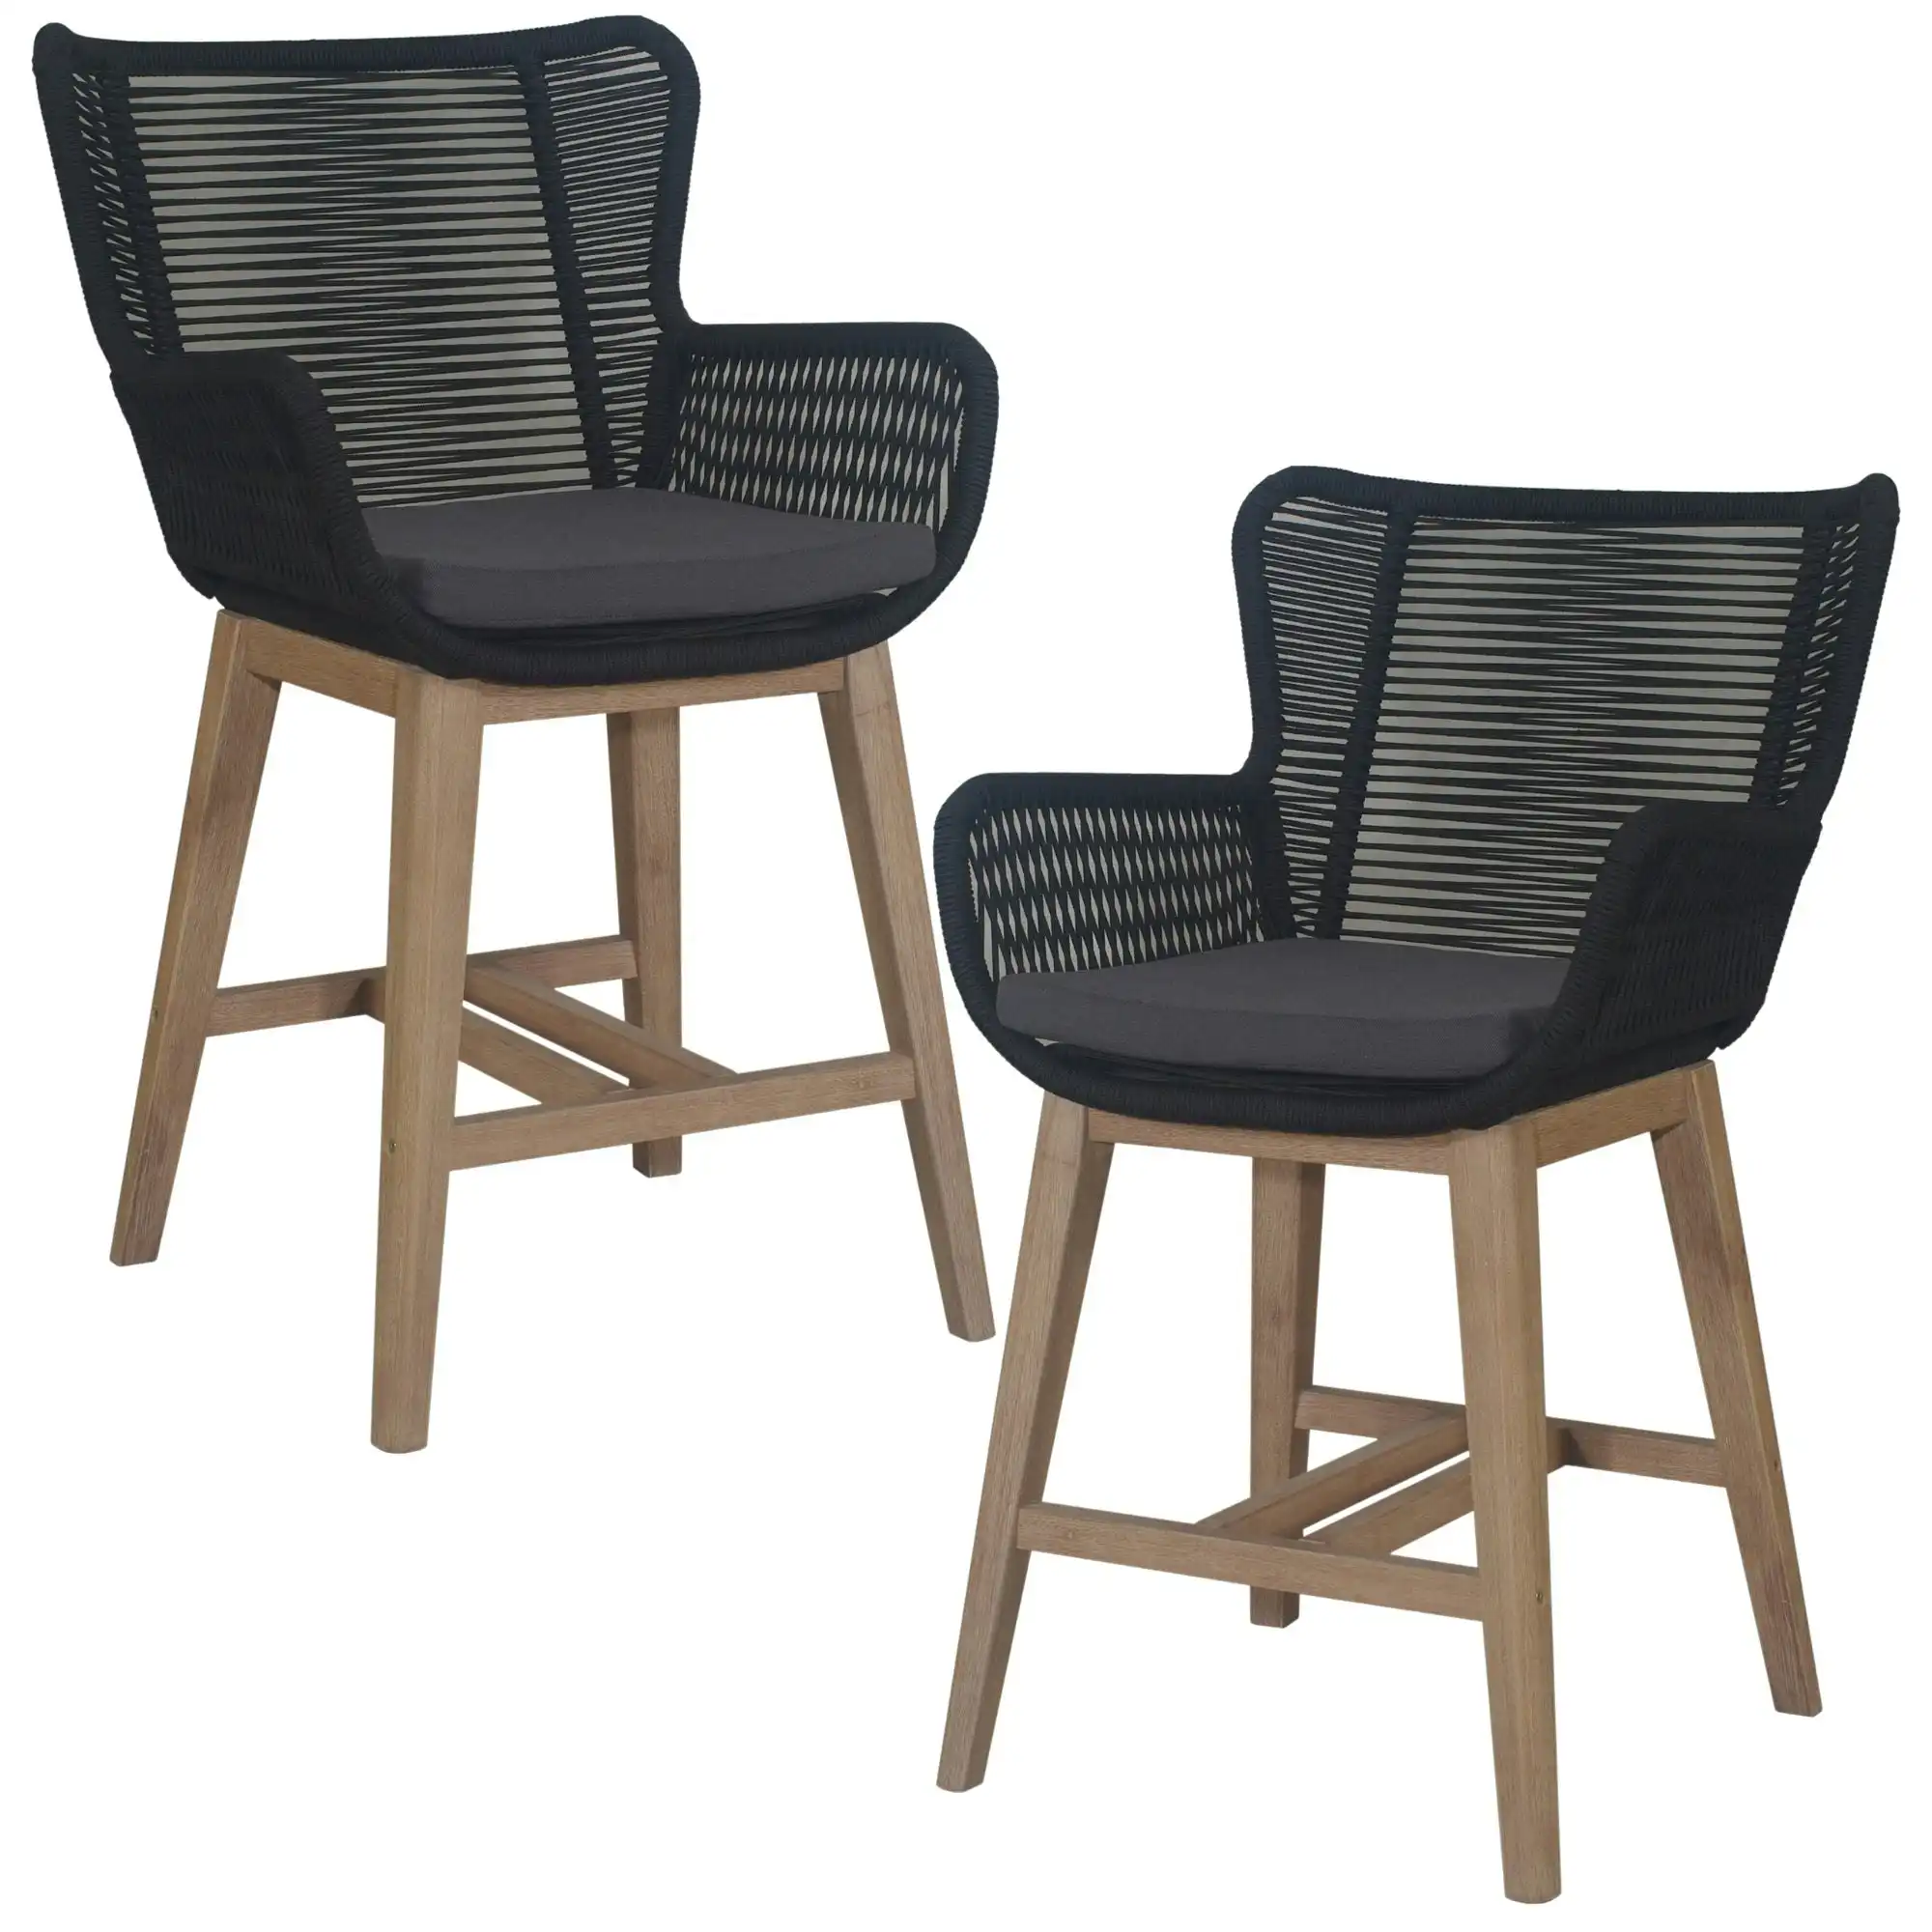 Stud Set of 2 Outdoor High Bar Dining Chair